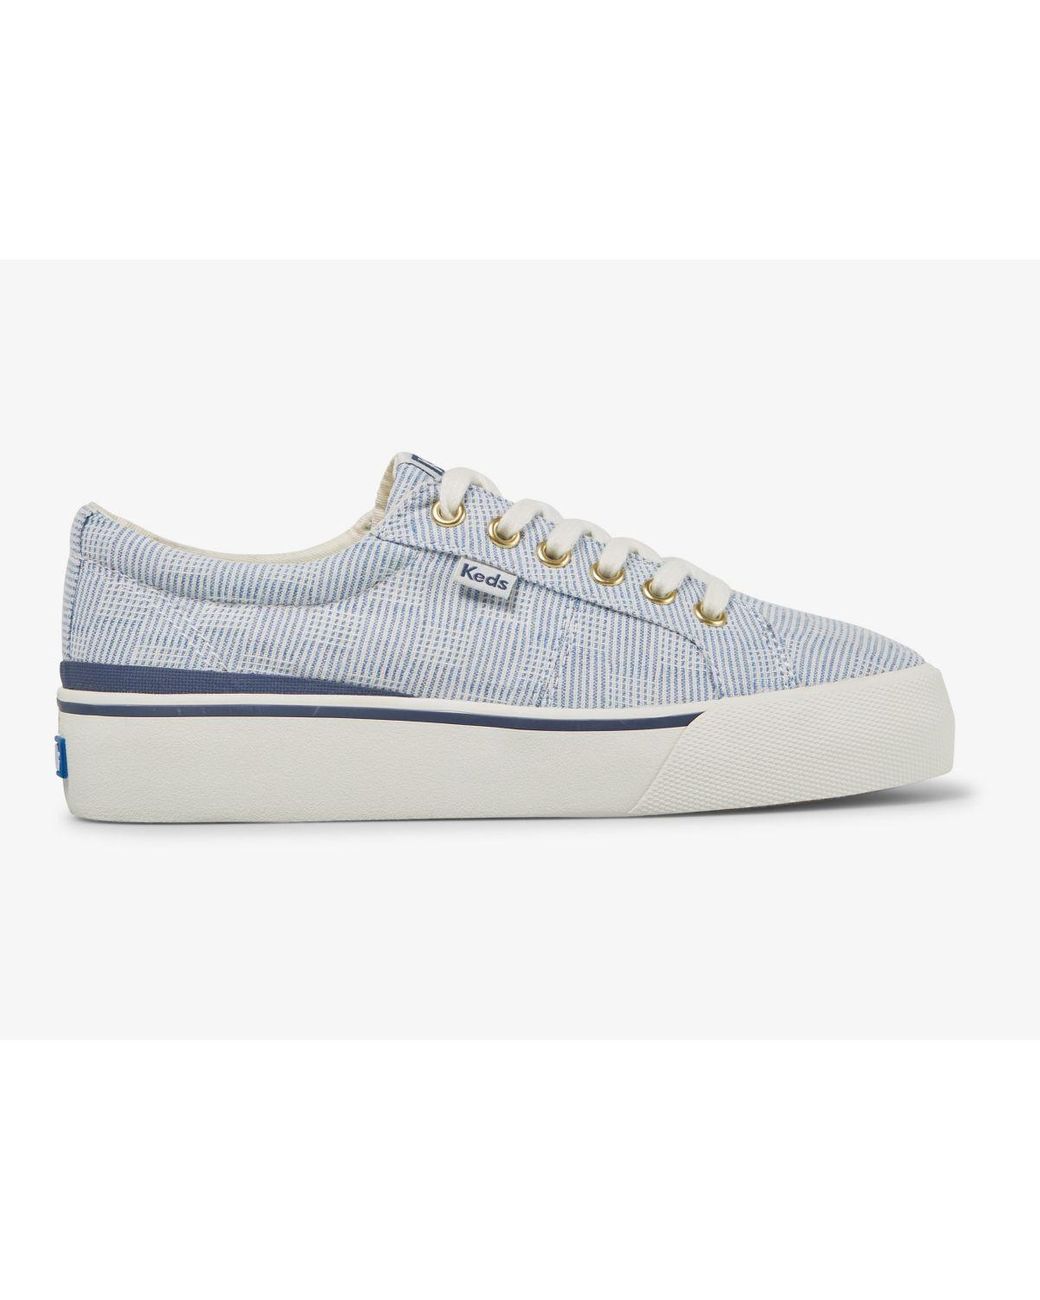 Keds Jump Kick Duo Canvas Crosshatch Sneaker in White | Lyst